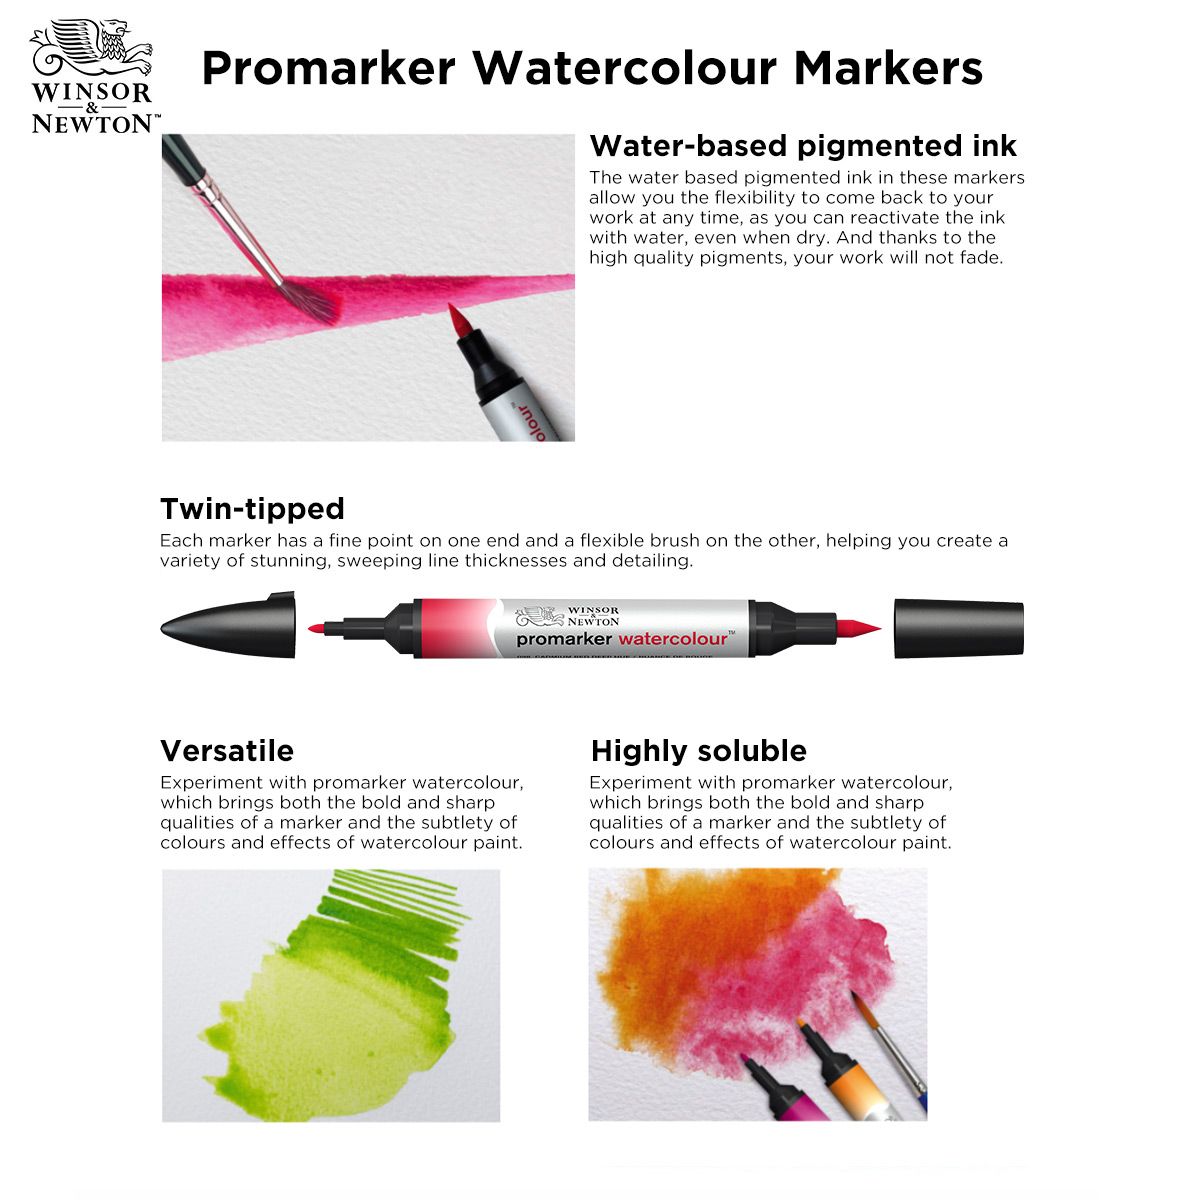 Each marker features 2 tips, 1 fine point and 1 flexible brush tip